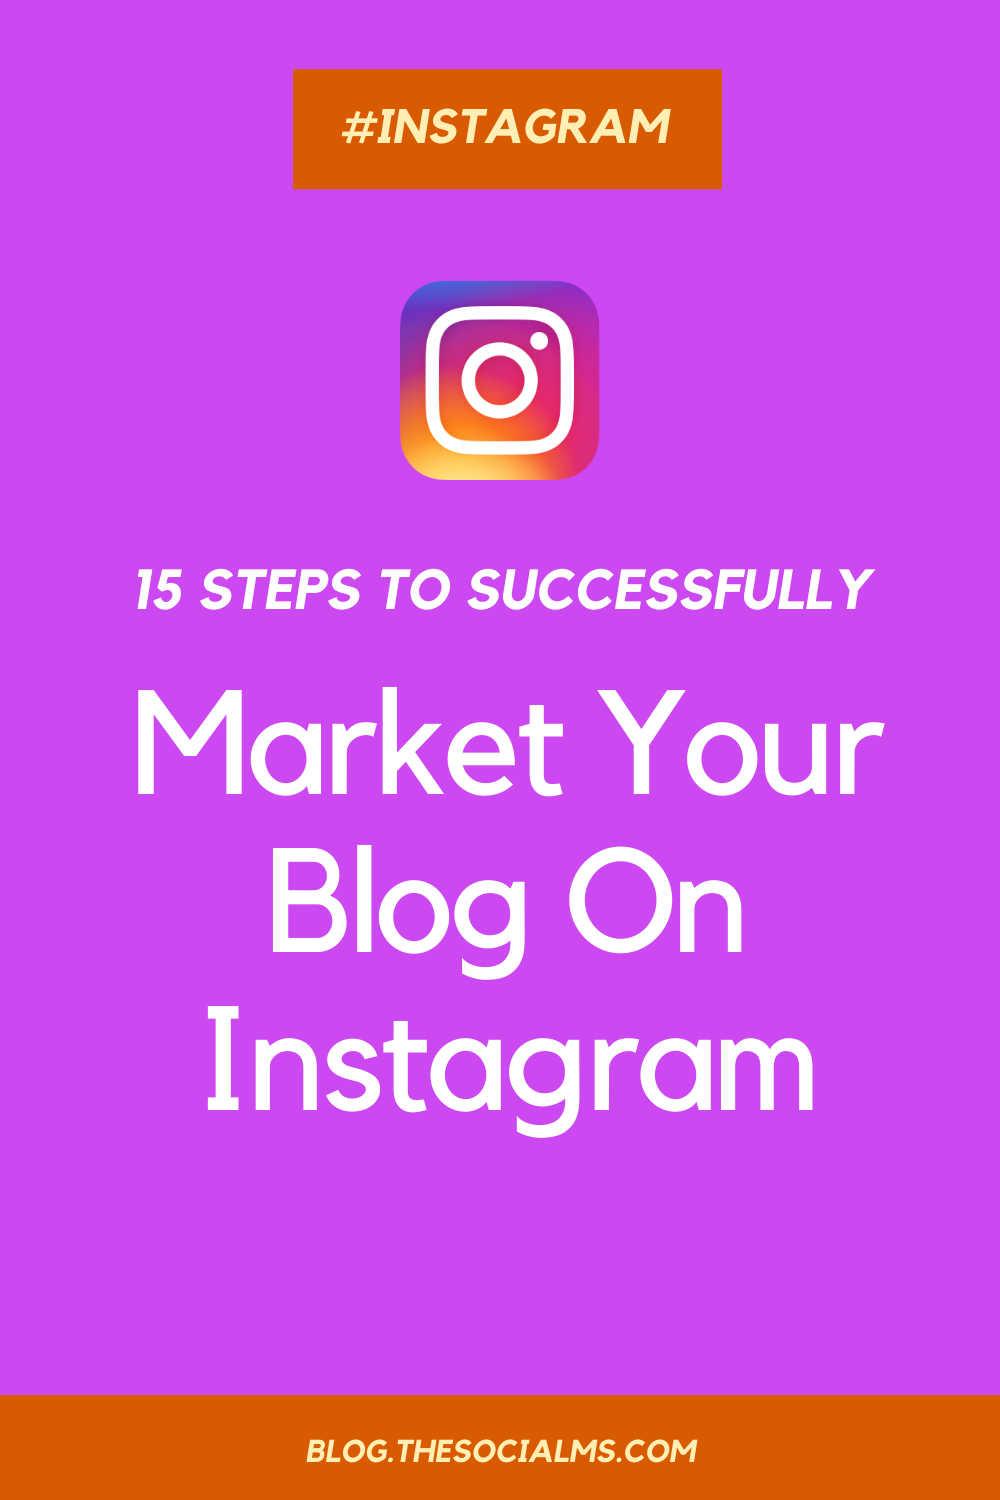 Can you market your blog on Instagram? Big question! Since you cannot simply share links to posts in your Instagram updates, you need some more sophisticated tactics to achieve your goals and have to be careful to get everything right to see an impact from your Instagram efforts #instagram #instagramtips #instagramforbloggers #instagramstrategy #instagrammarketing #blogtraffic #blogpromotion #bloggingtips #blogpostpromotion #trafficgeneration #socialmediatips